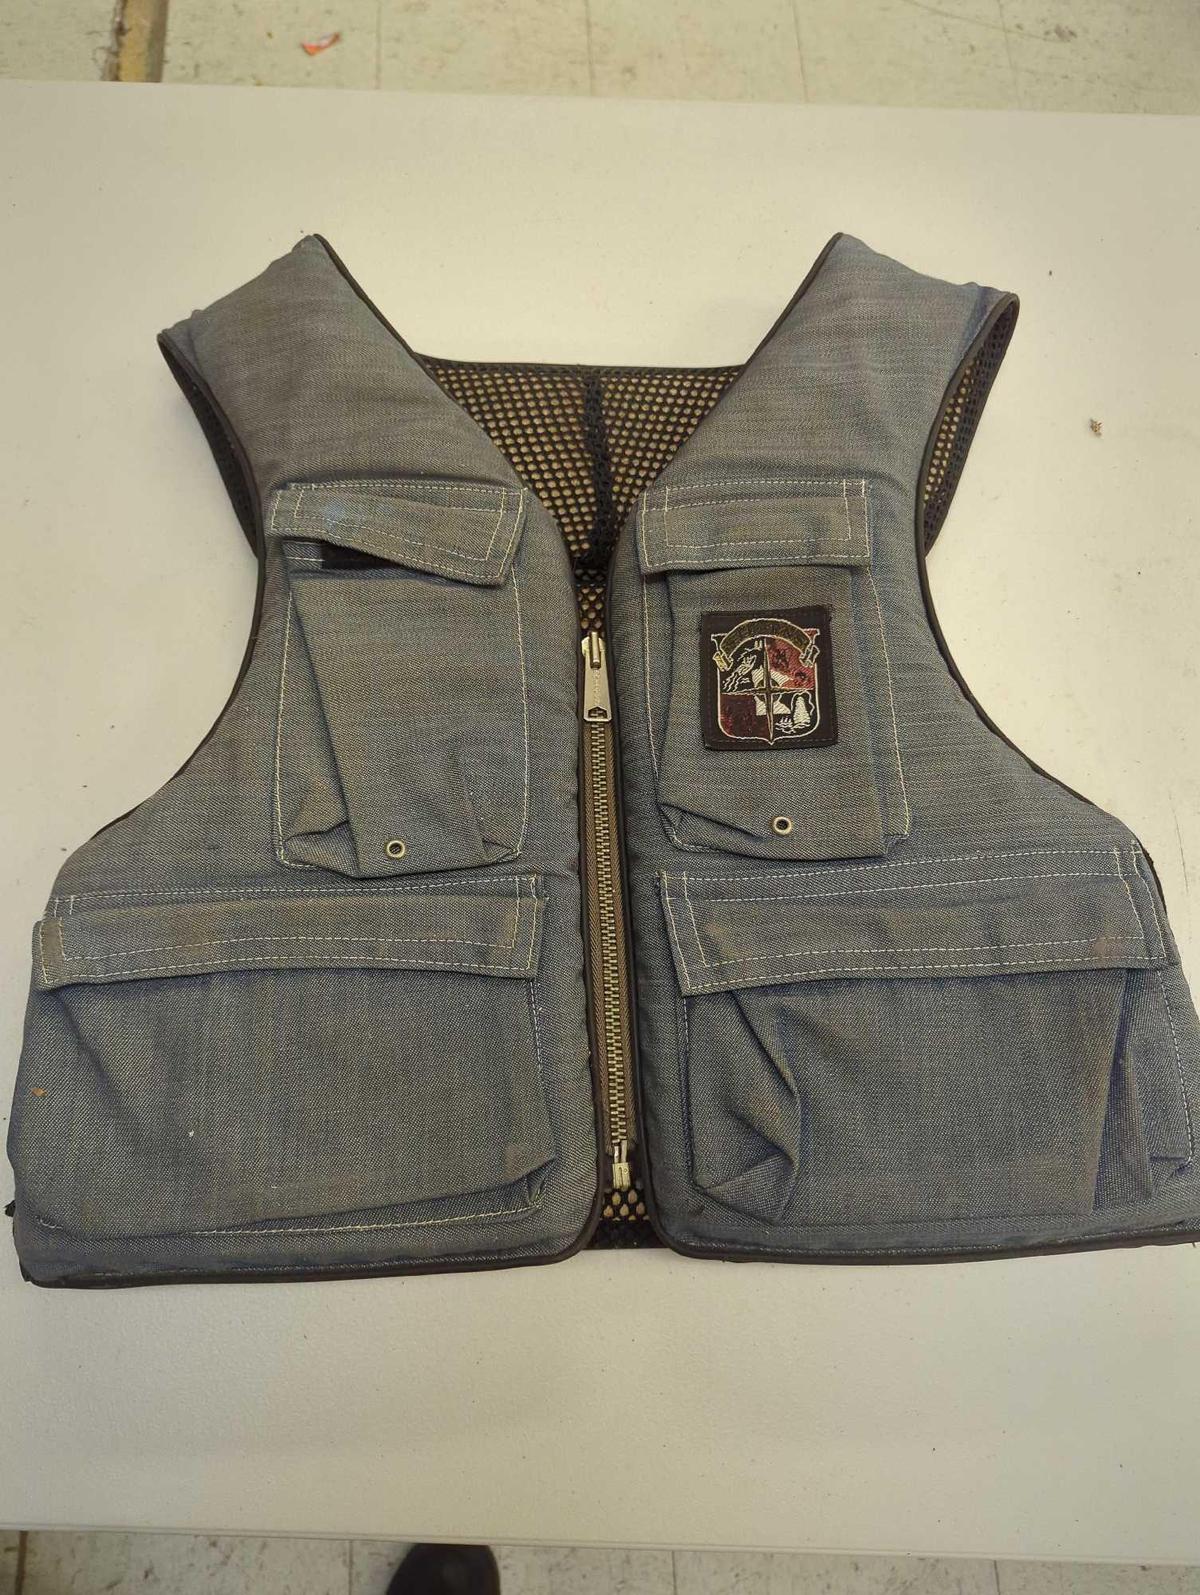 VTG Stearns Sans Souci Type III Flotation Fishing Vest Chest SZ 40-42 Med Adult. Comes as is shown